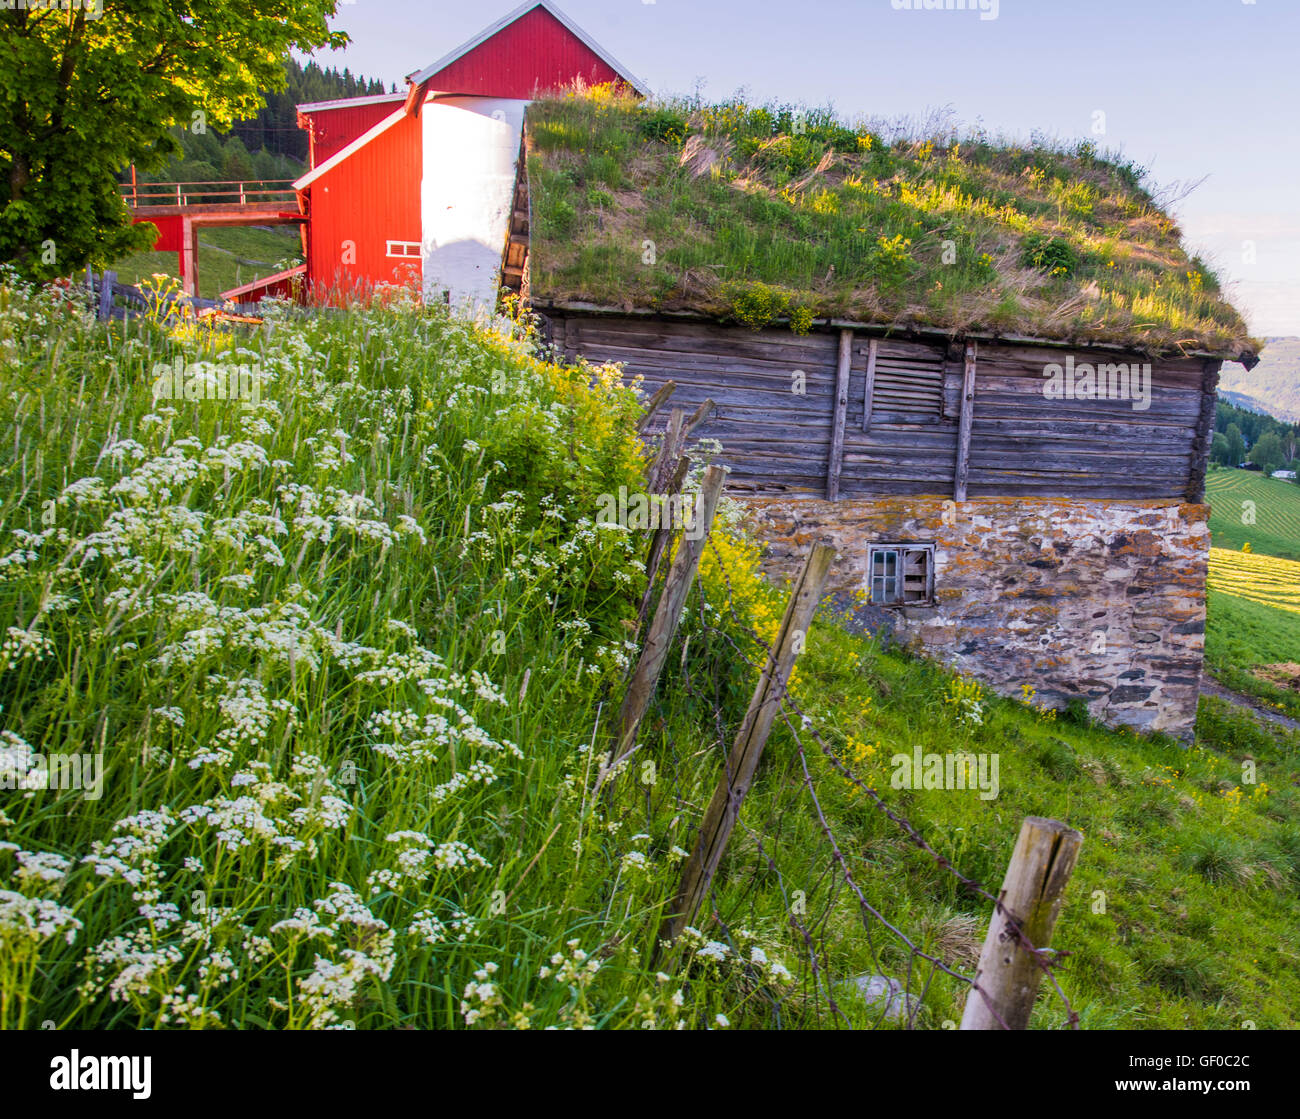 Farms, Red Silo barn, Old Wooden Building with Grass Roof, Grudbrandsdalen Valley near Lillehammer, Norway, More of Rosmdal, Stock Photo